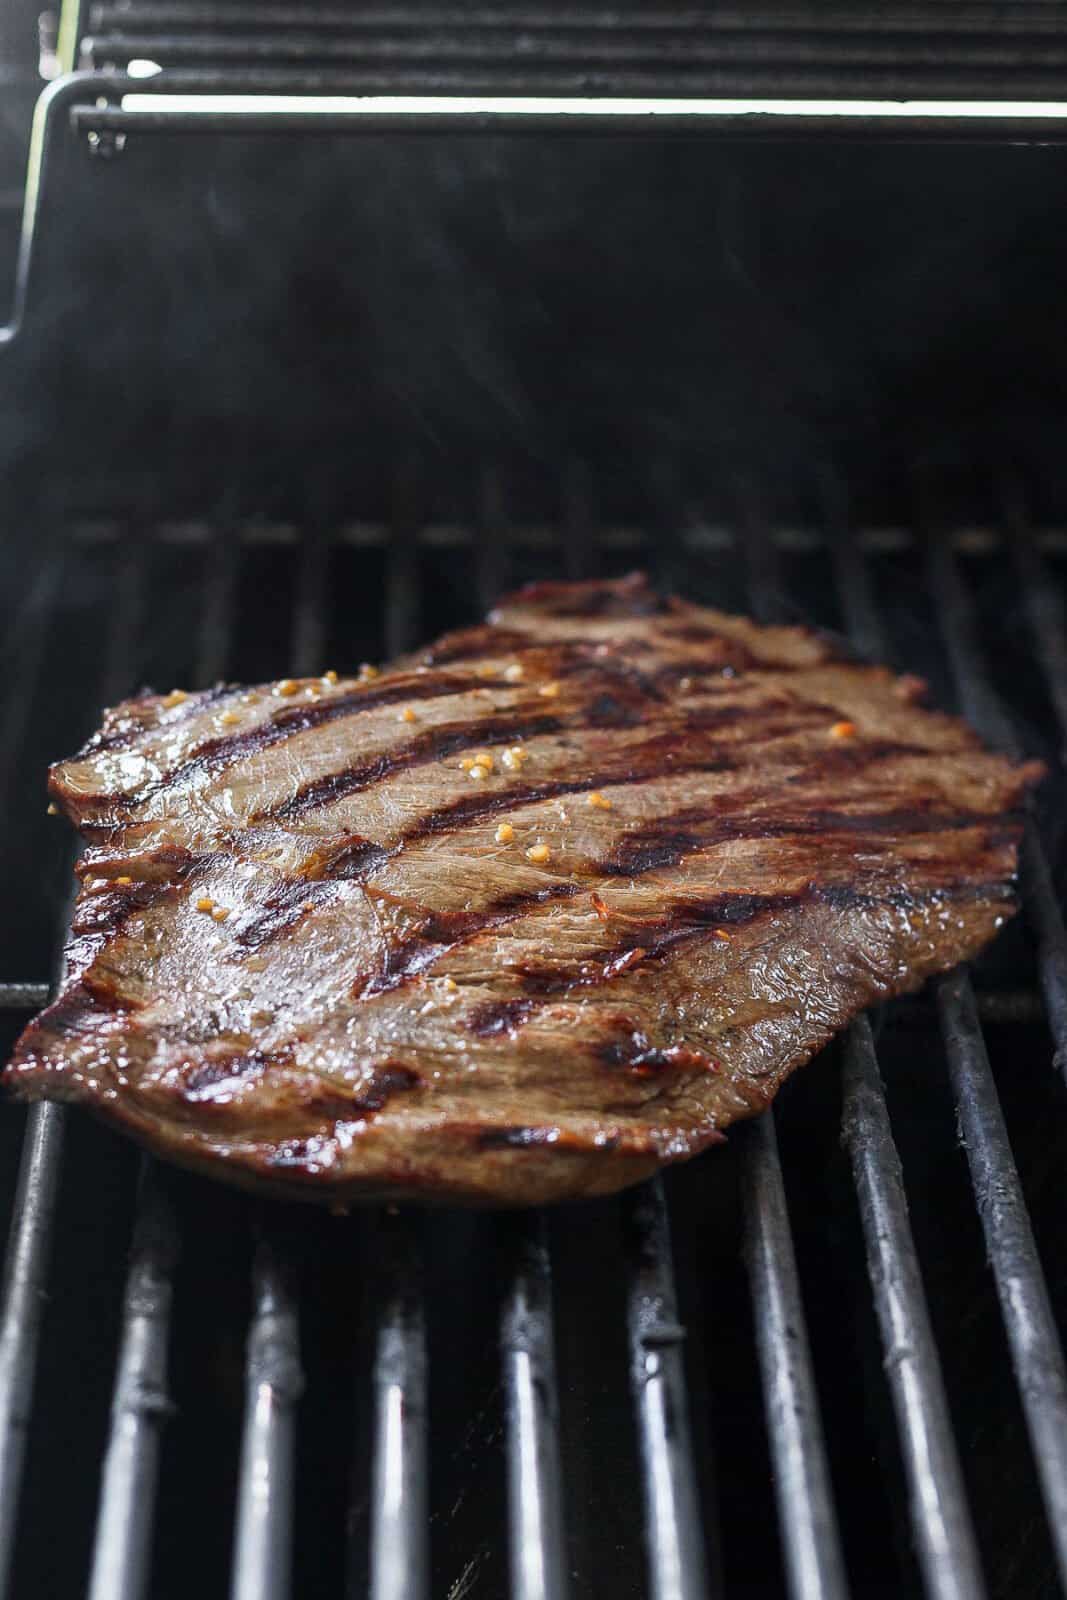 A flank steak cooking on the grill.